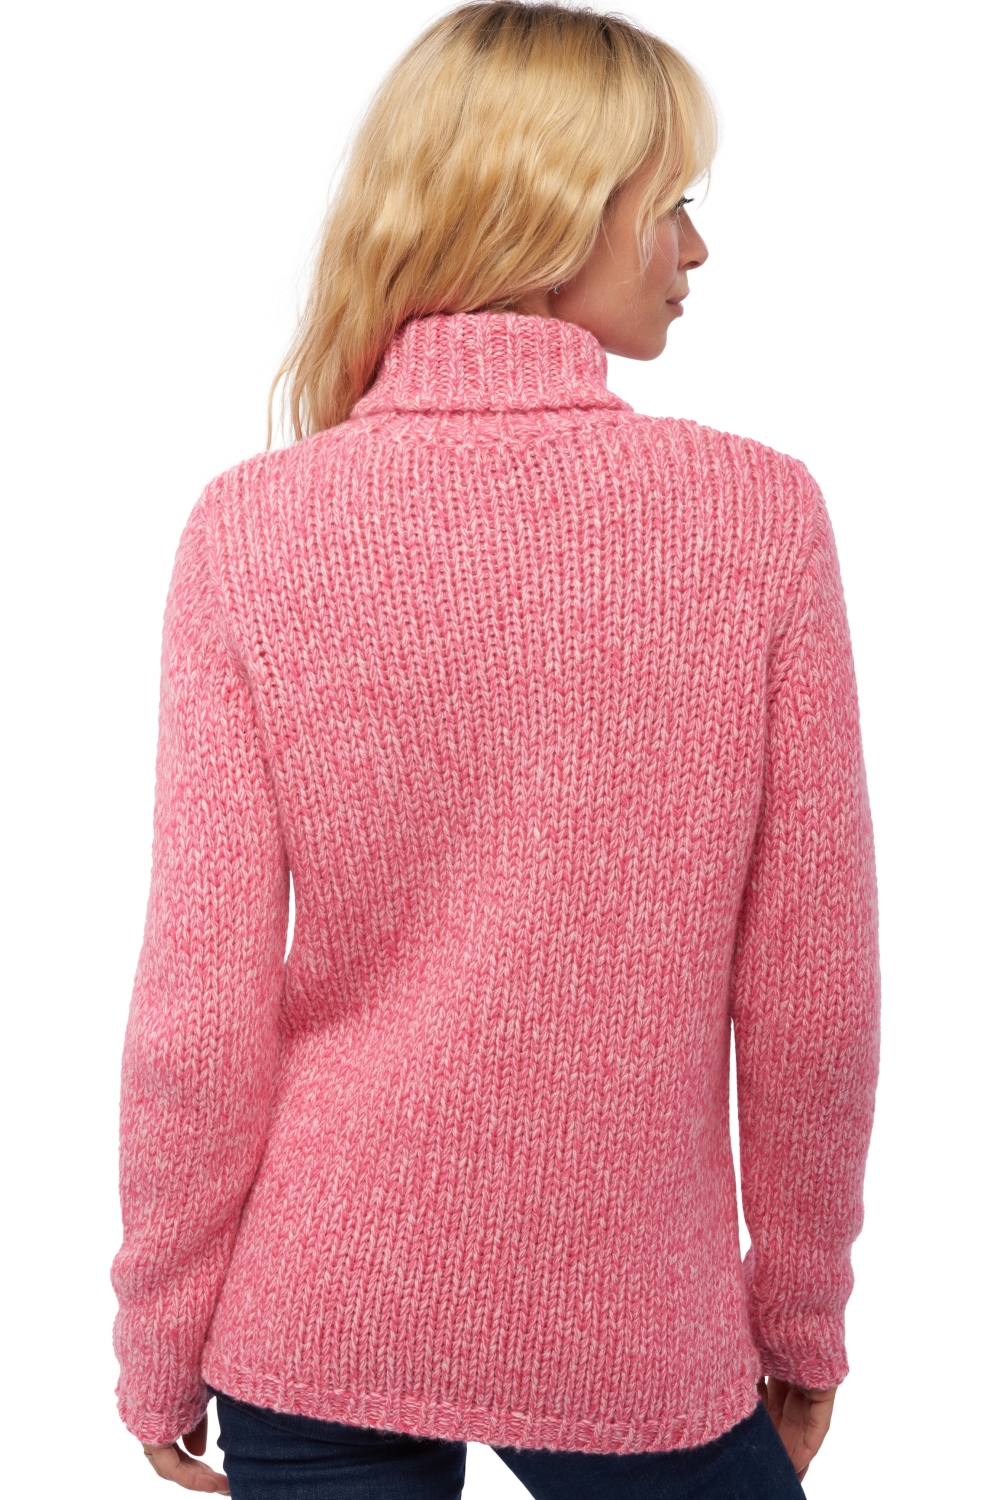 Cachemire pull femme col roule vicenza rose shocking rose pale xs